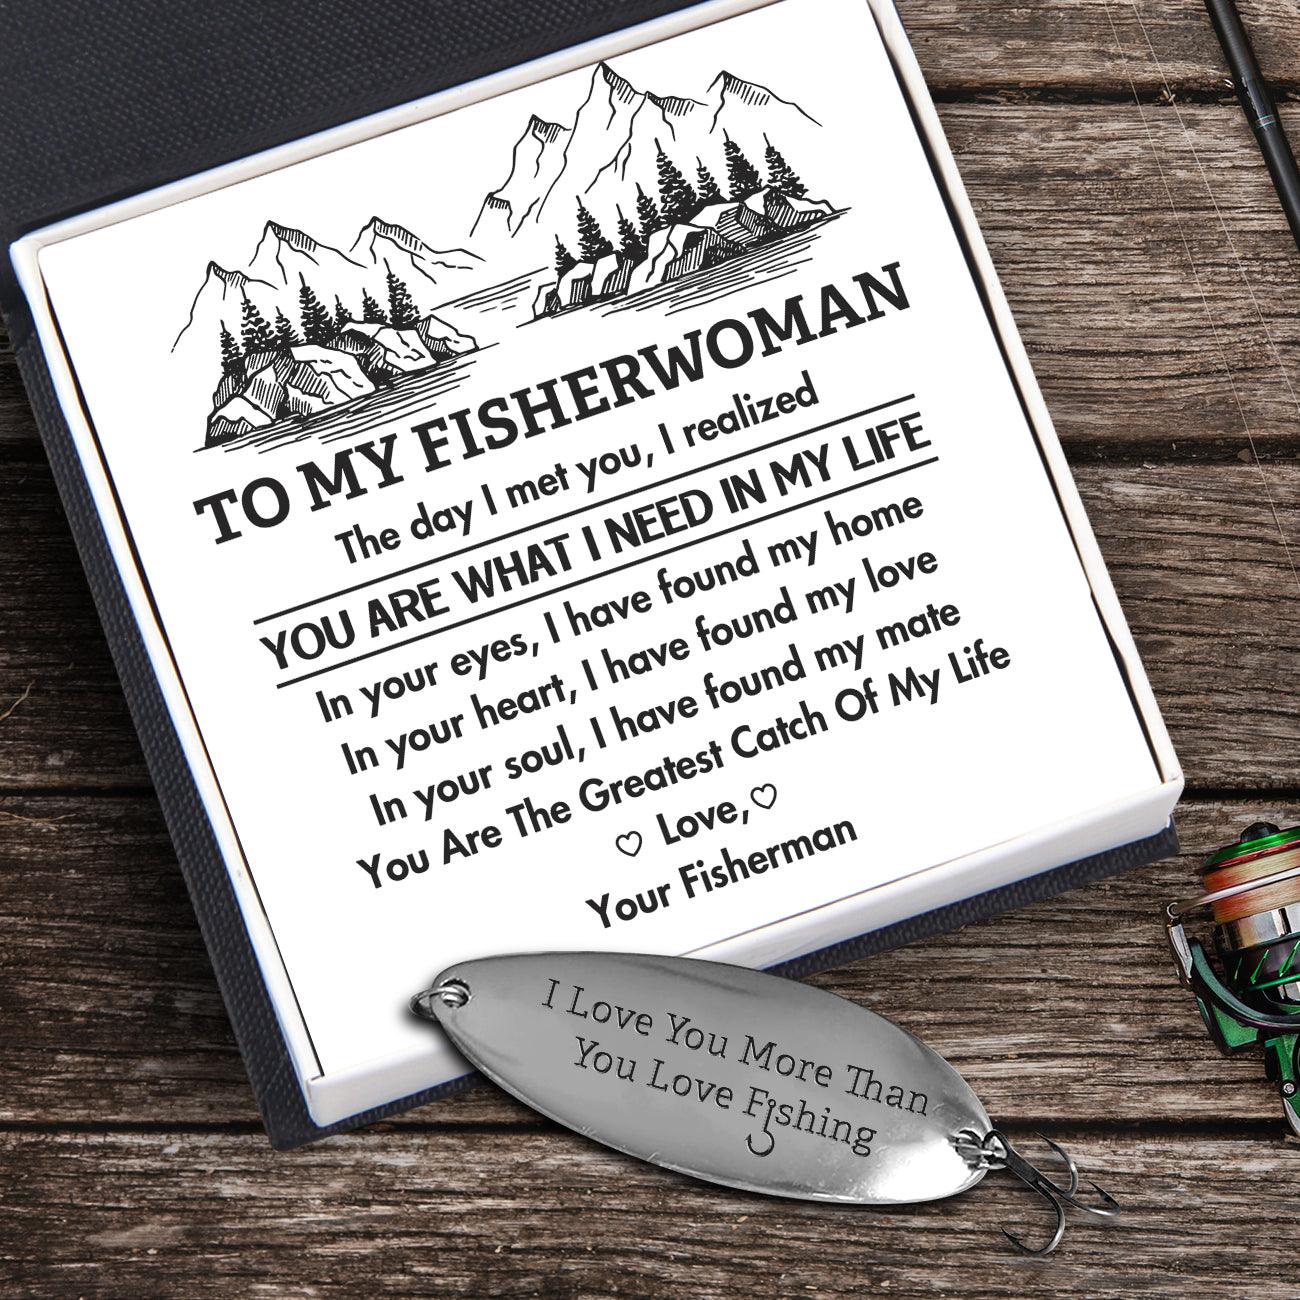 Fishing Lure - Fishing - To My Fisherwoman - You Are The Greatest Catch Of My Life - Augfb13001 - Gifts Holder